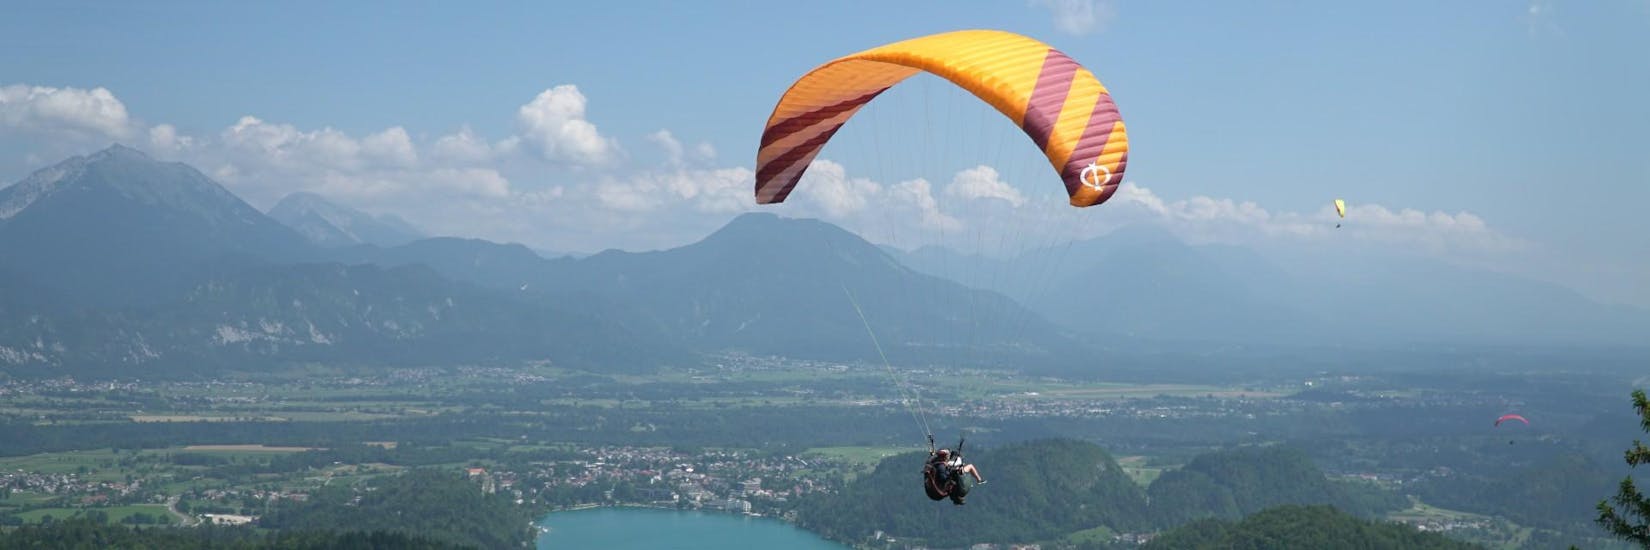 A pilot and a customer glide through the air together during tandem paragliding and enjoy the view of Lake Bled.